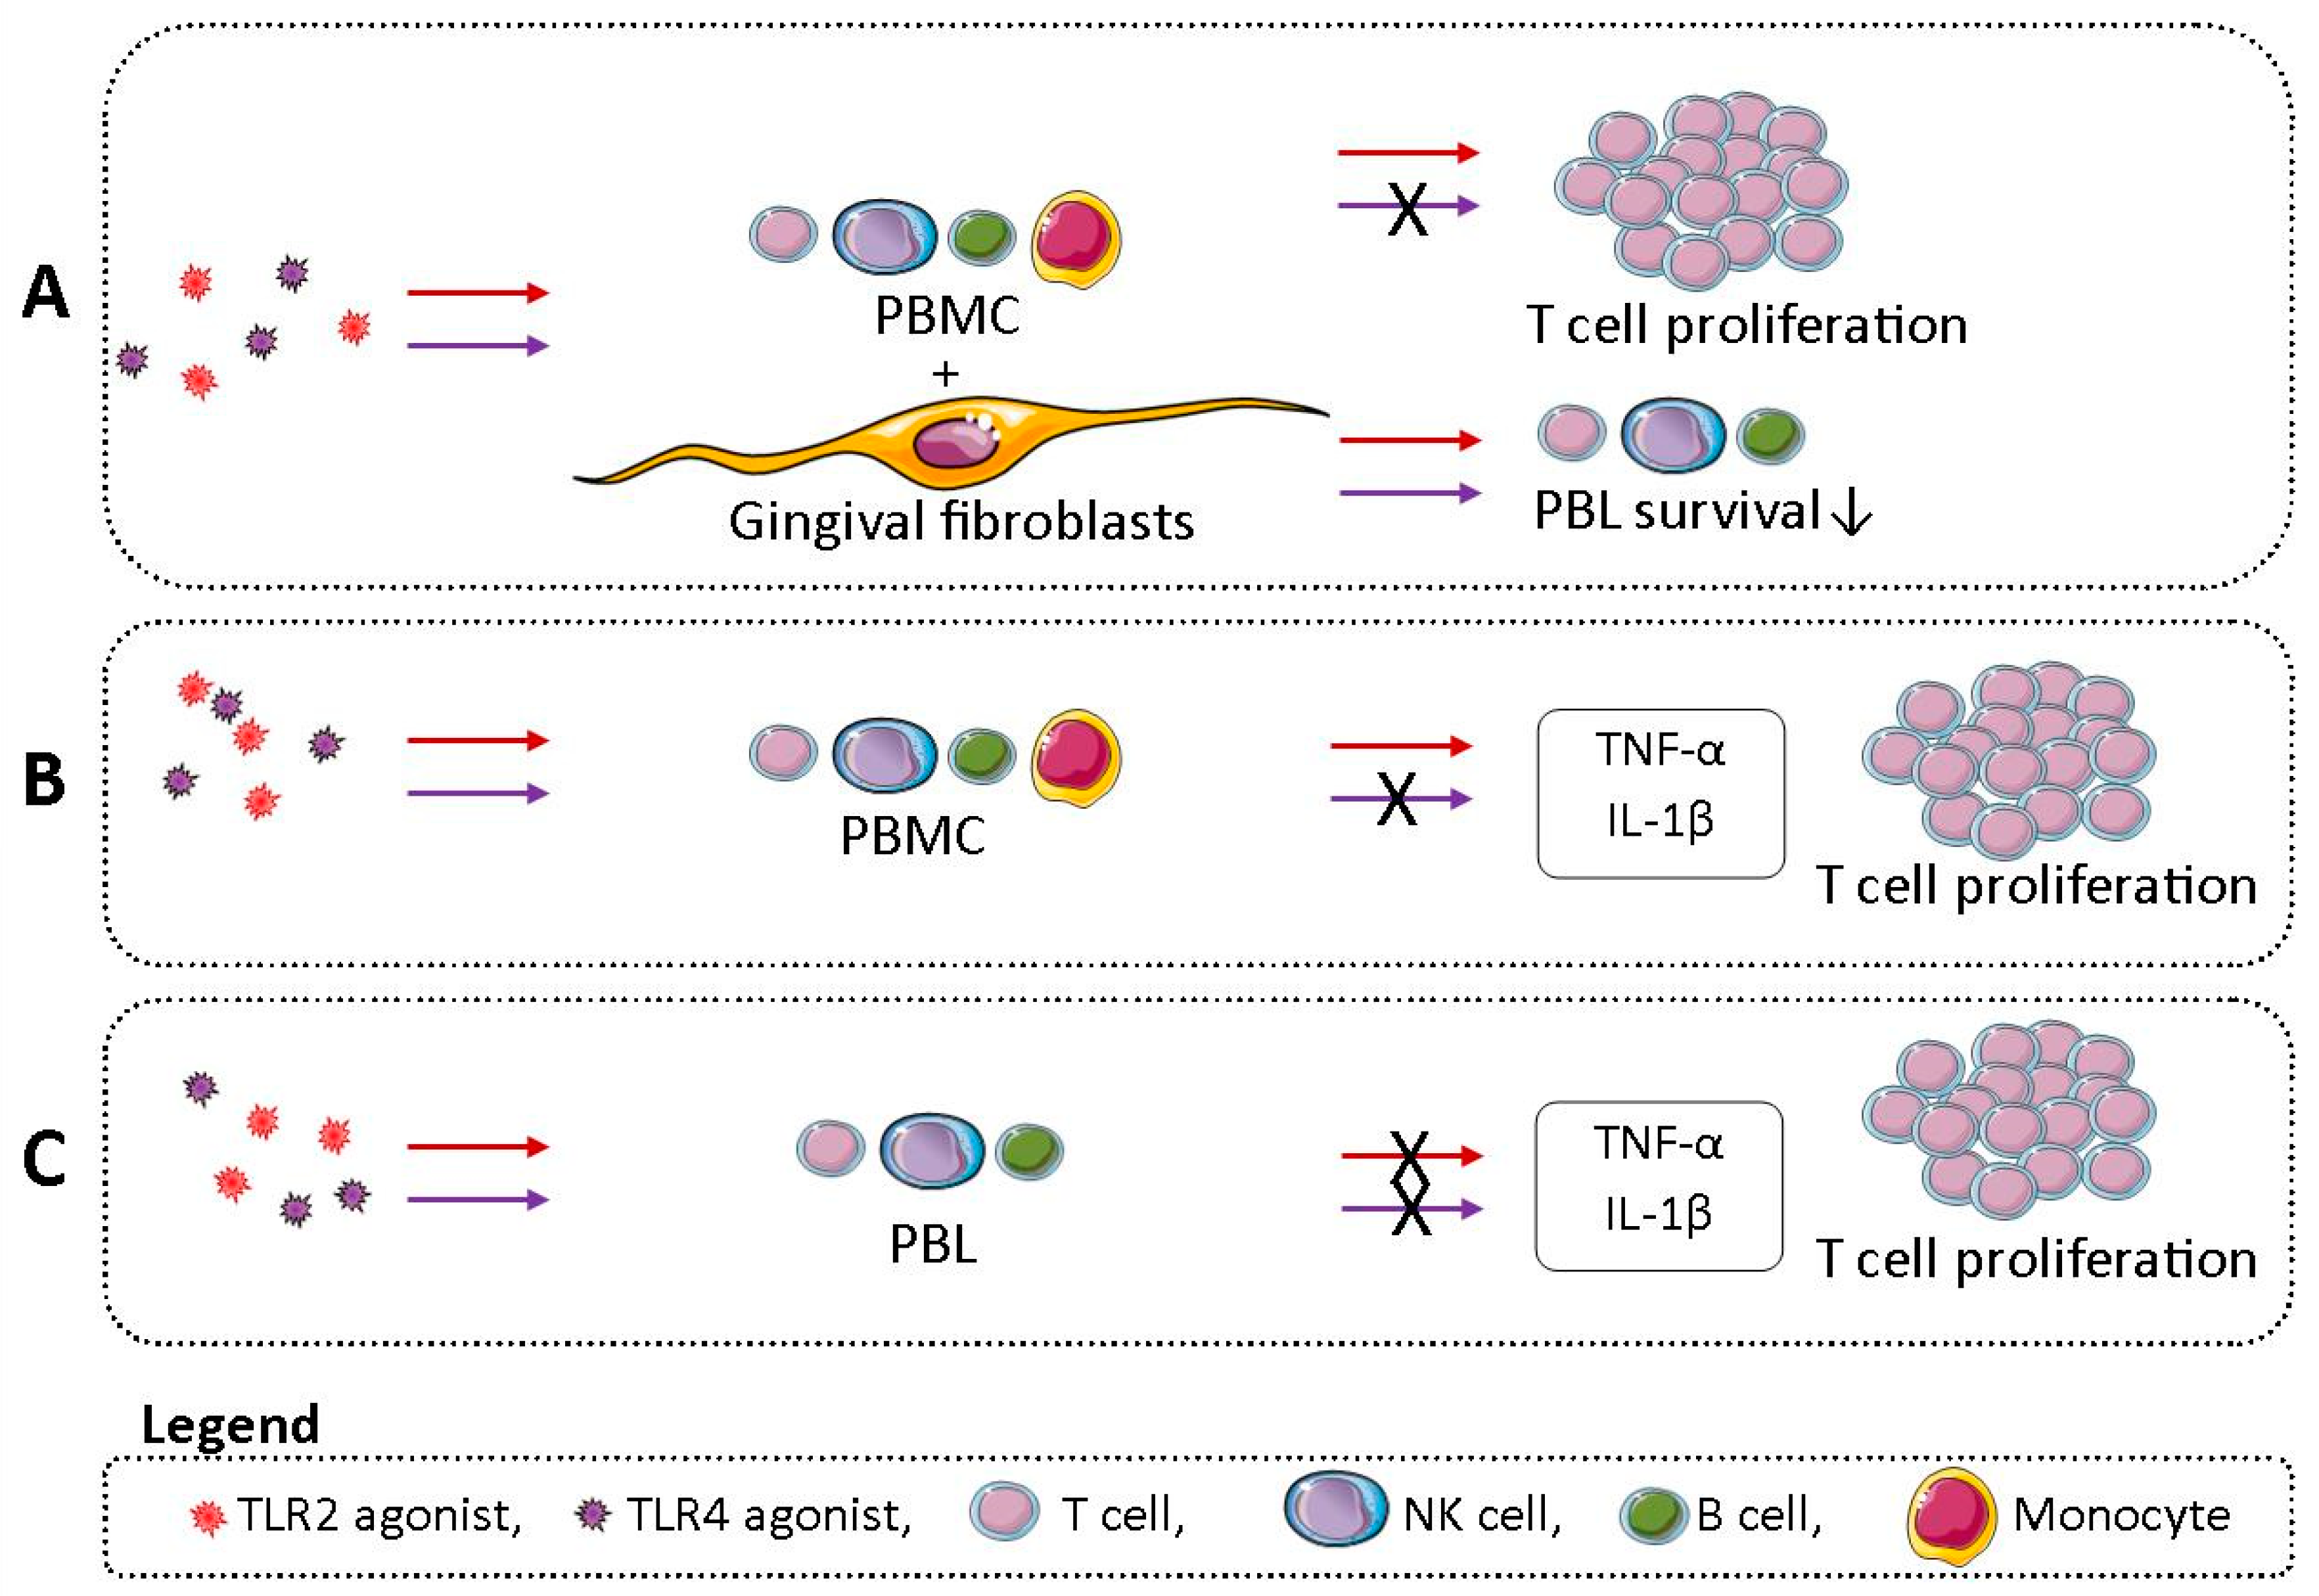 IJMS | Free Full-Text | T Cell Proliferation Is Induced by Chronically  TLR2-Stimulated Gingival Fibroblasts or Monocytes